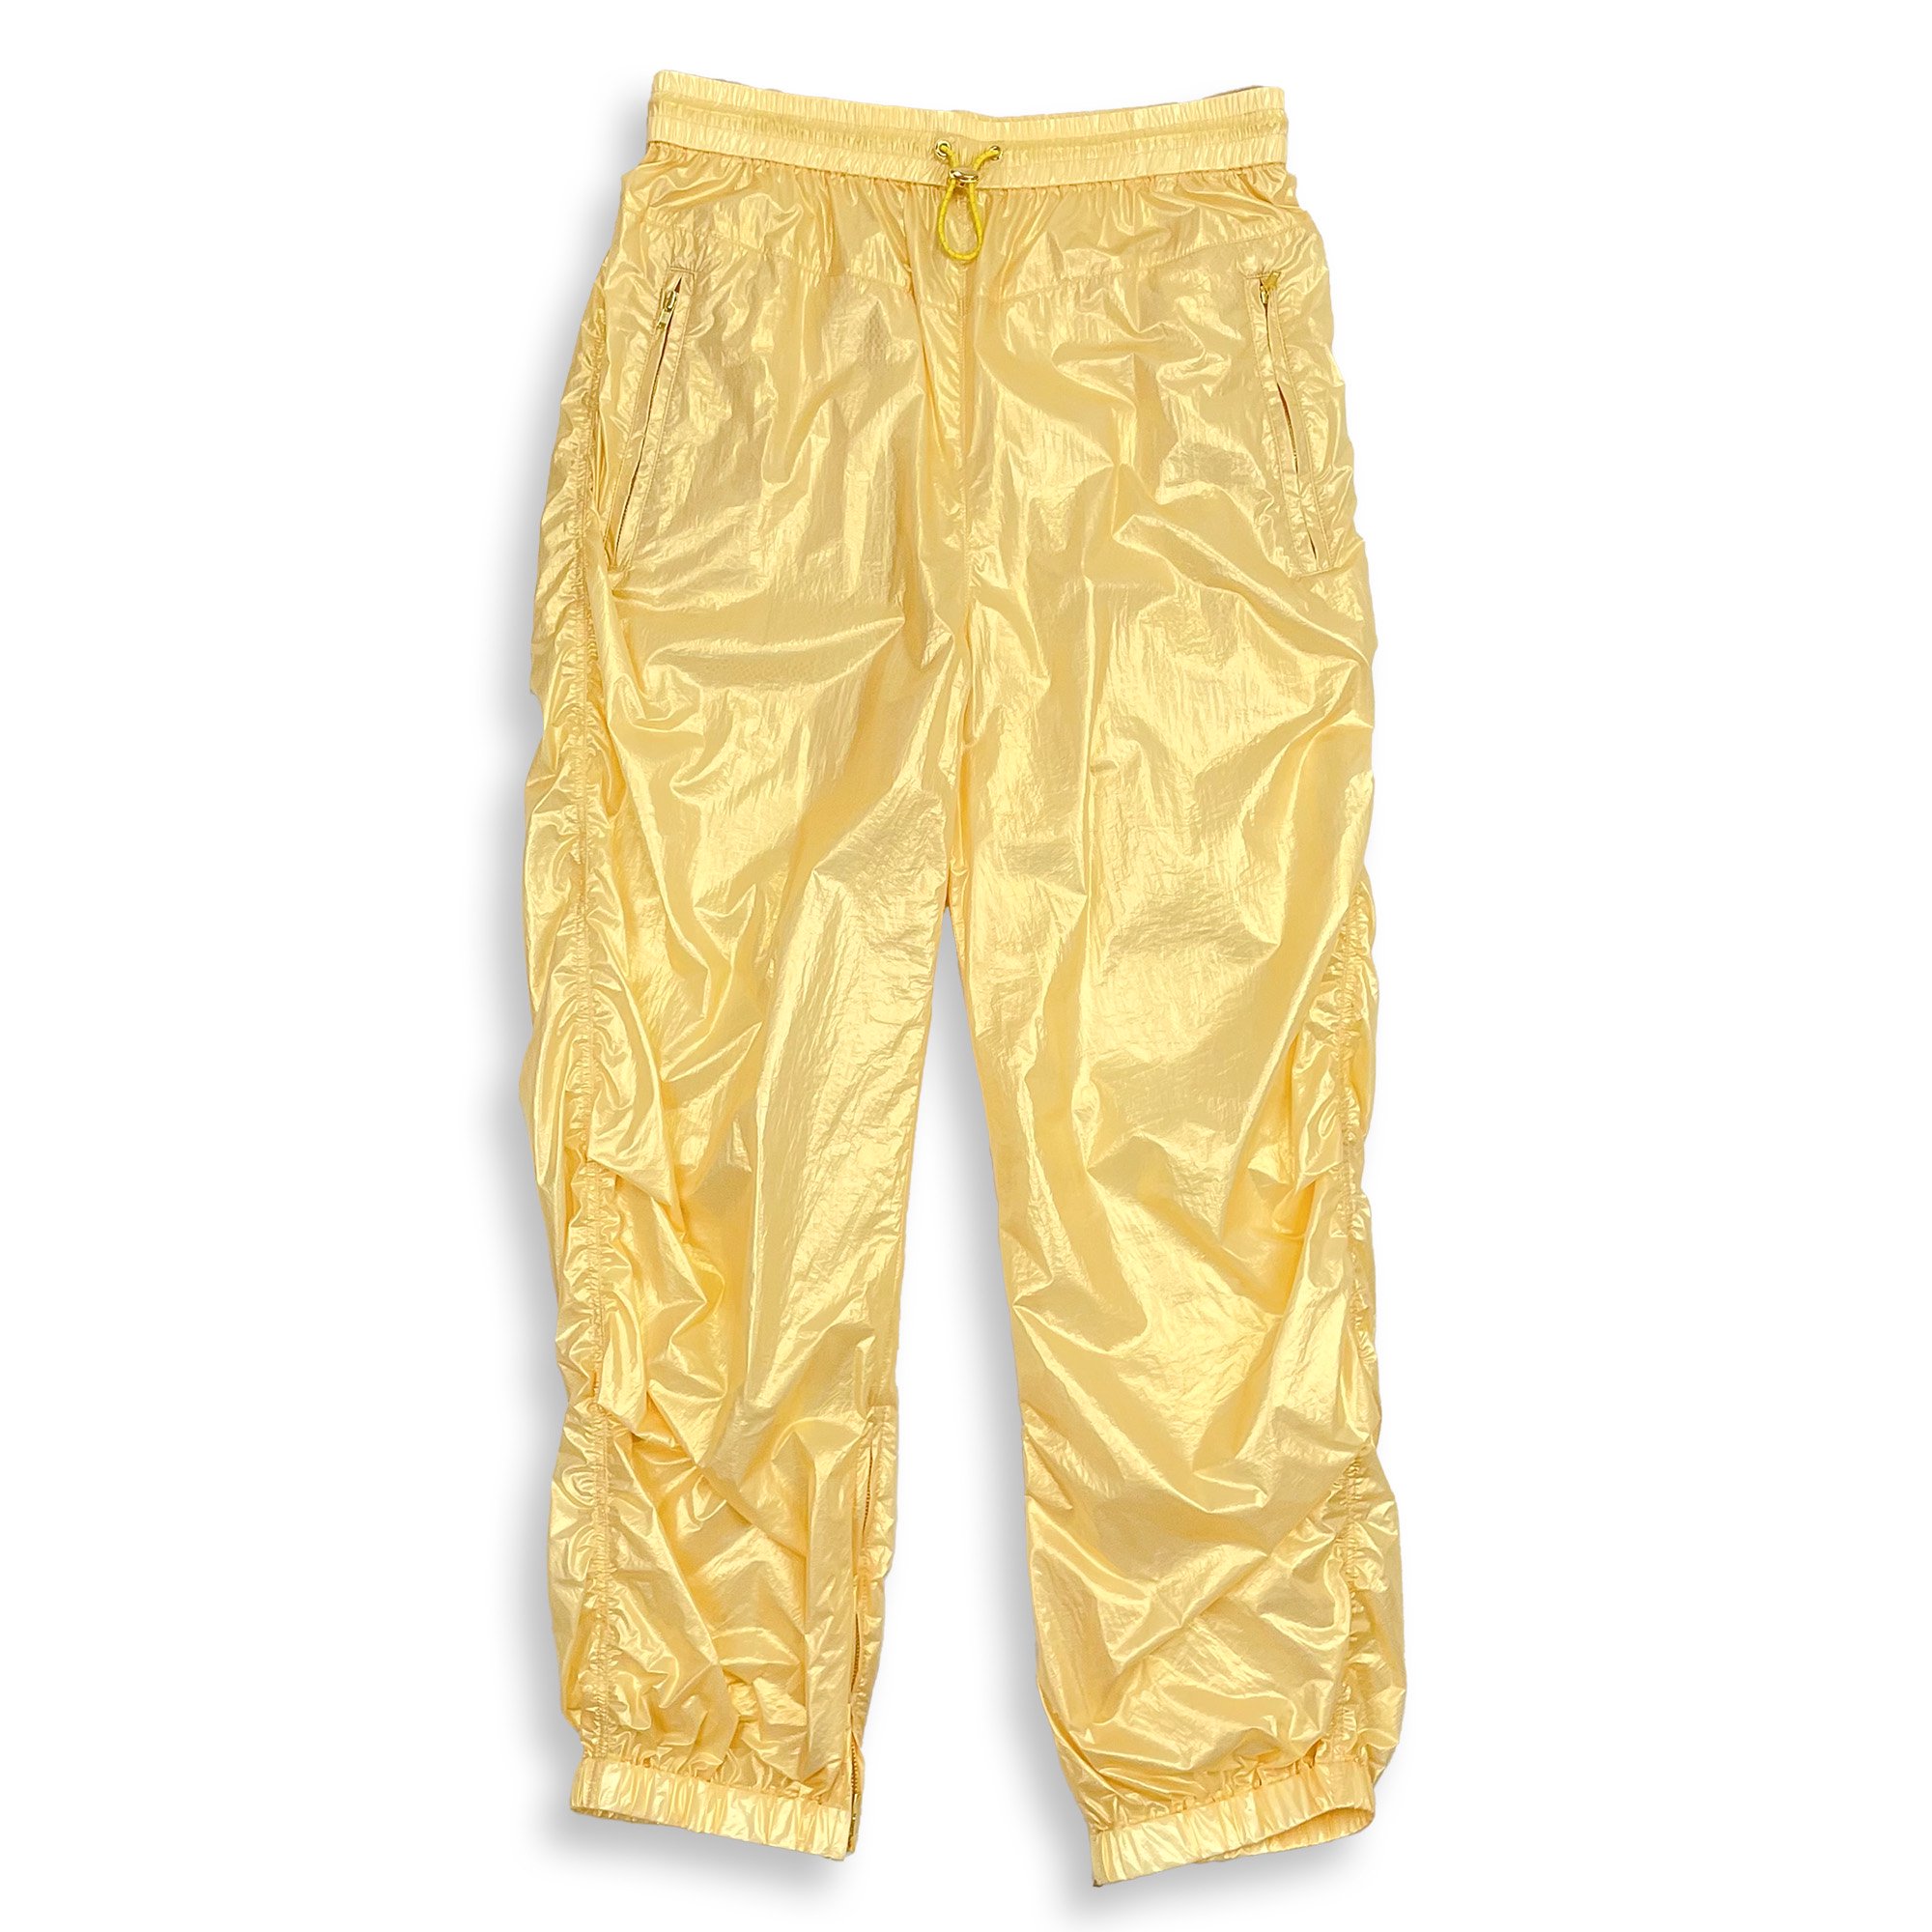 <img class='new_mark_img1' src='https://img.shop-pro.jp/img/new/icons7.gif' style='border:none;display:inline;margin:0px;padding:0px;width:auto;' />VENIT PARACHUTE PANTS